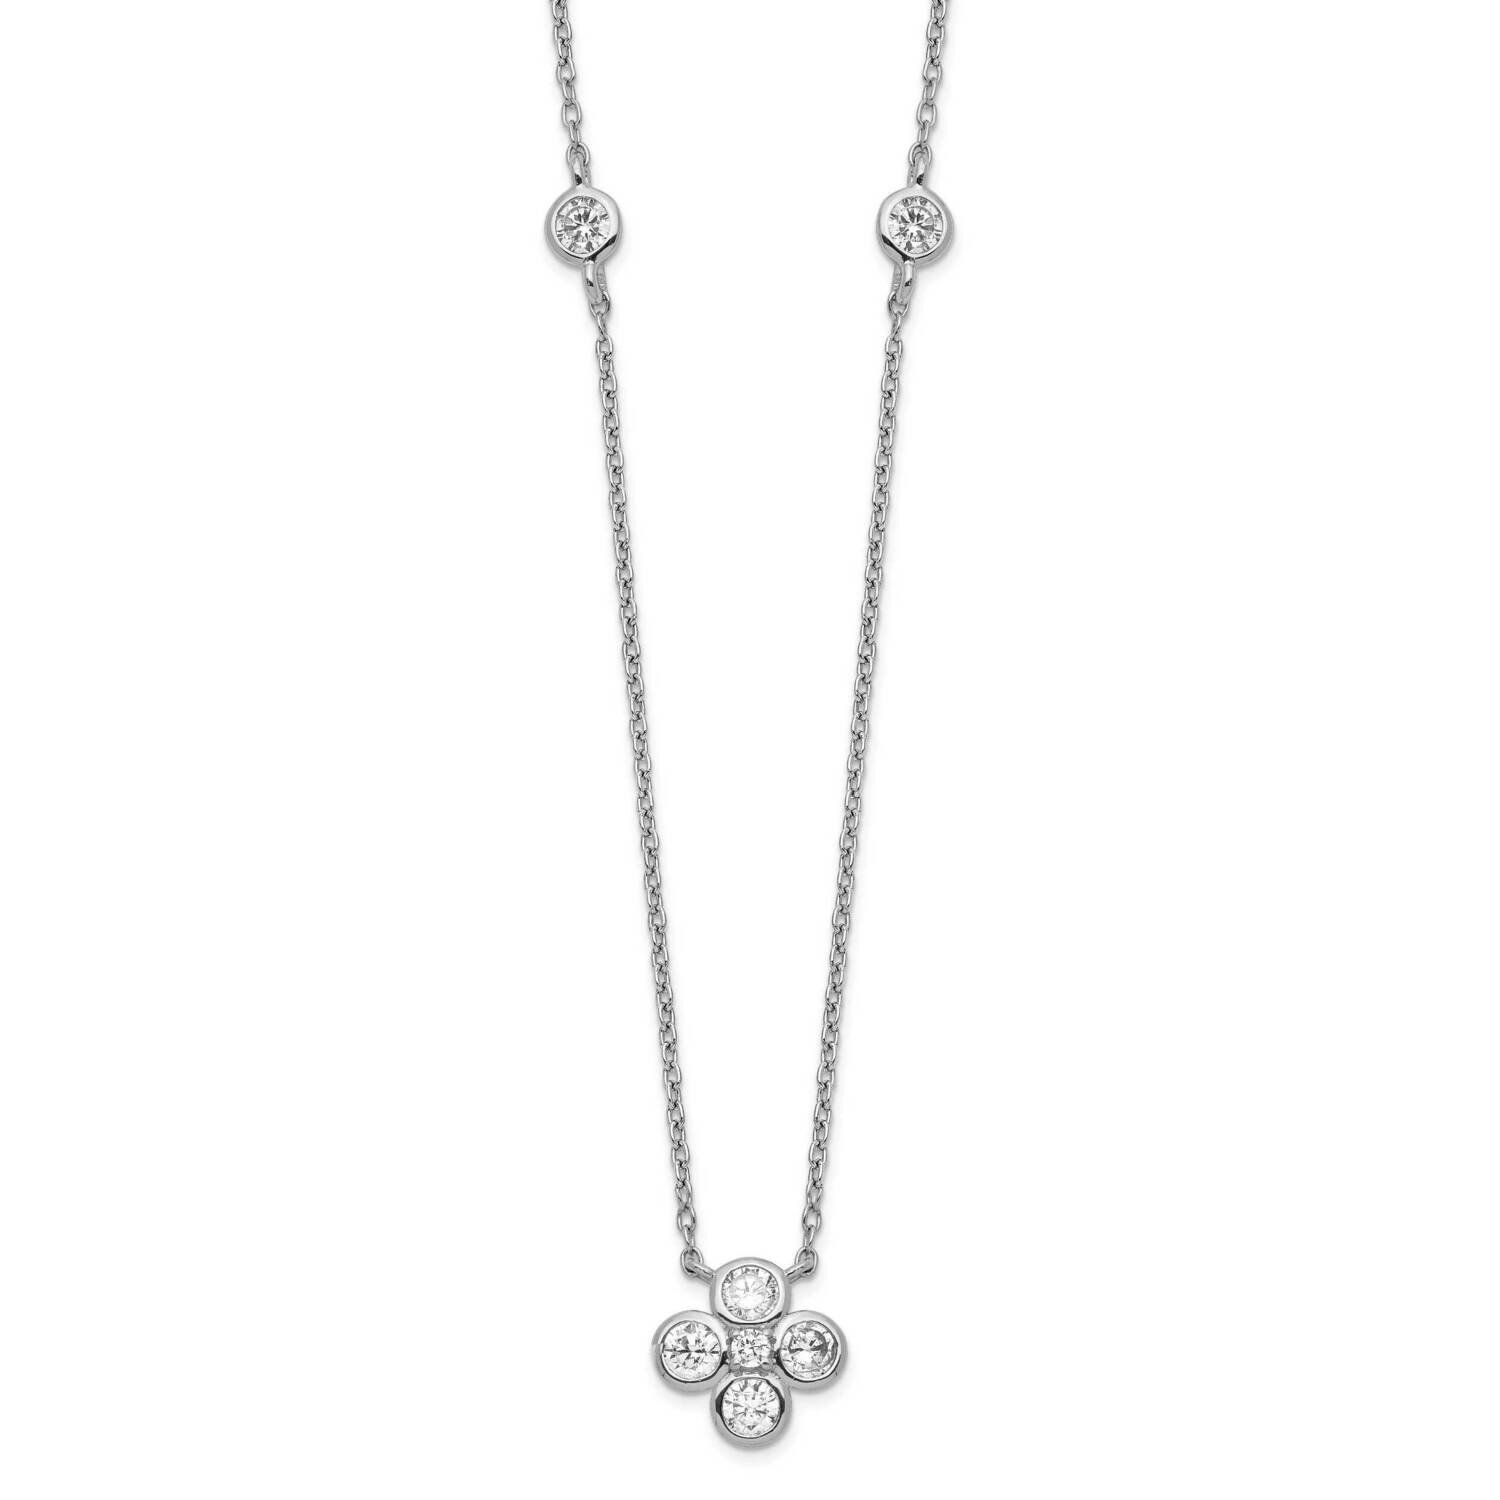 Polished CZ Flower with 2 Inch Extension Necklace Sterling Silver Rhodium-Plated QG5319-18